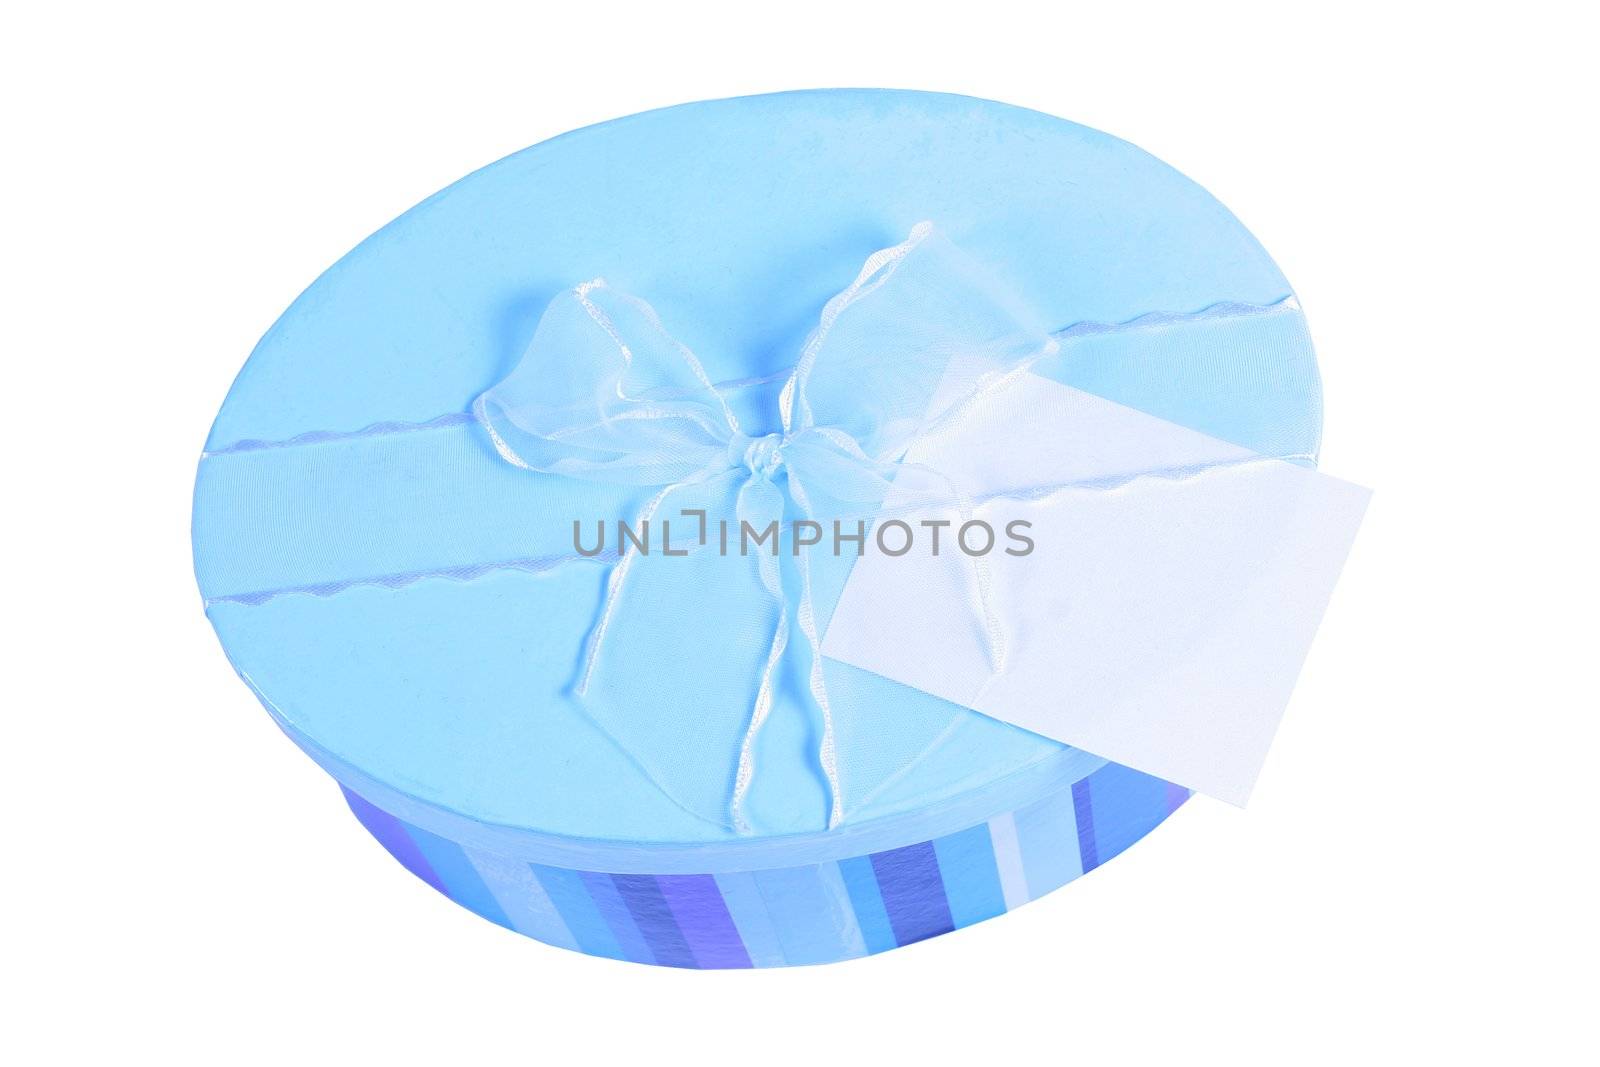 Blue pastel striped gift box with tag isolated on white by jarenwicklund